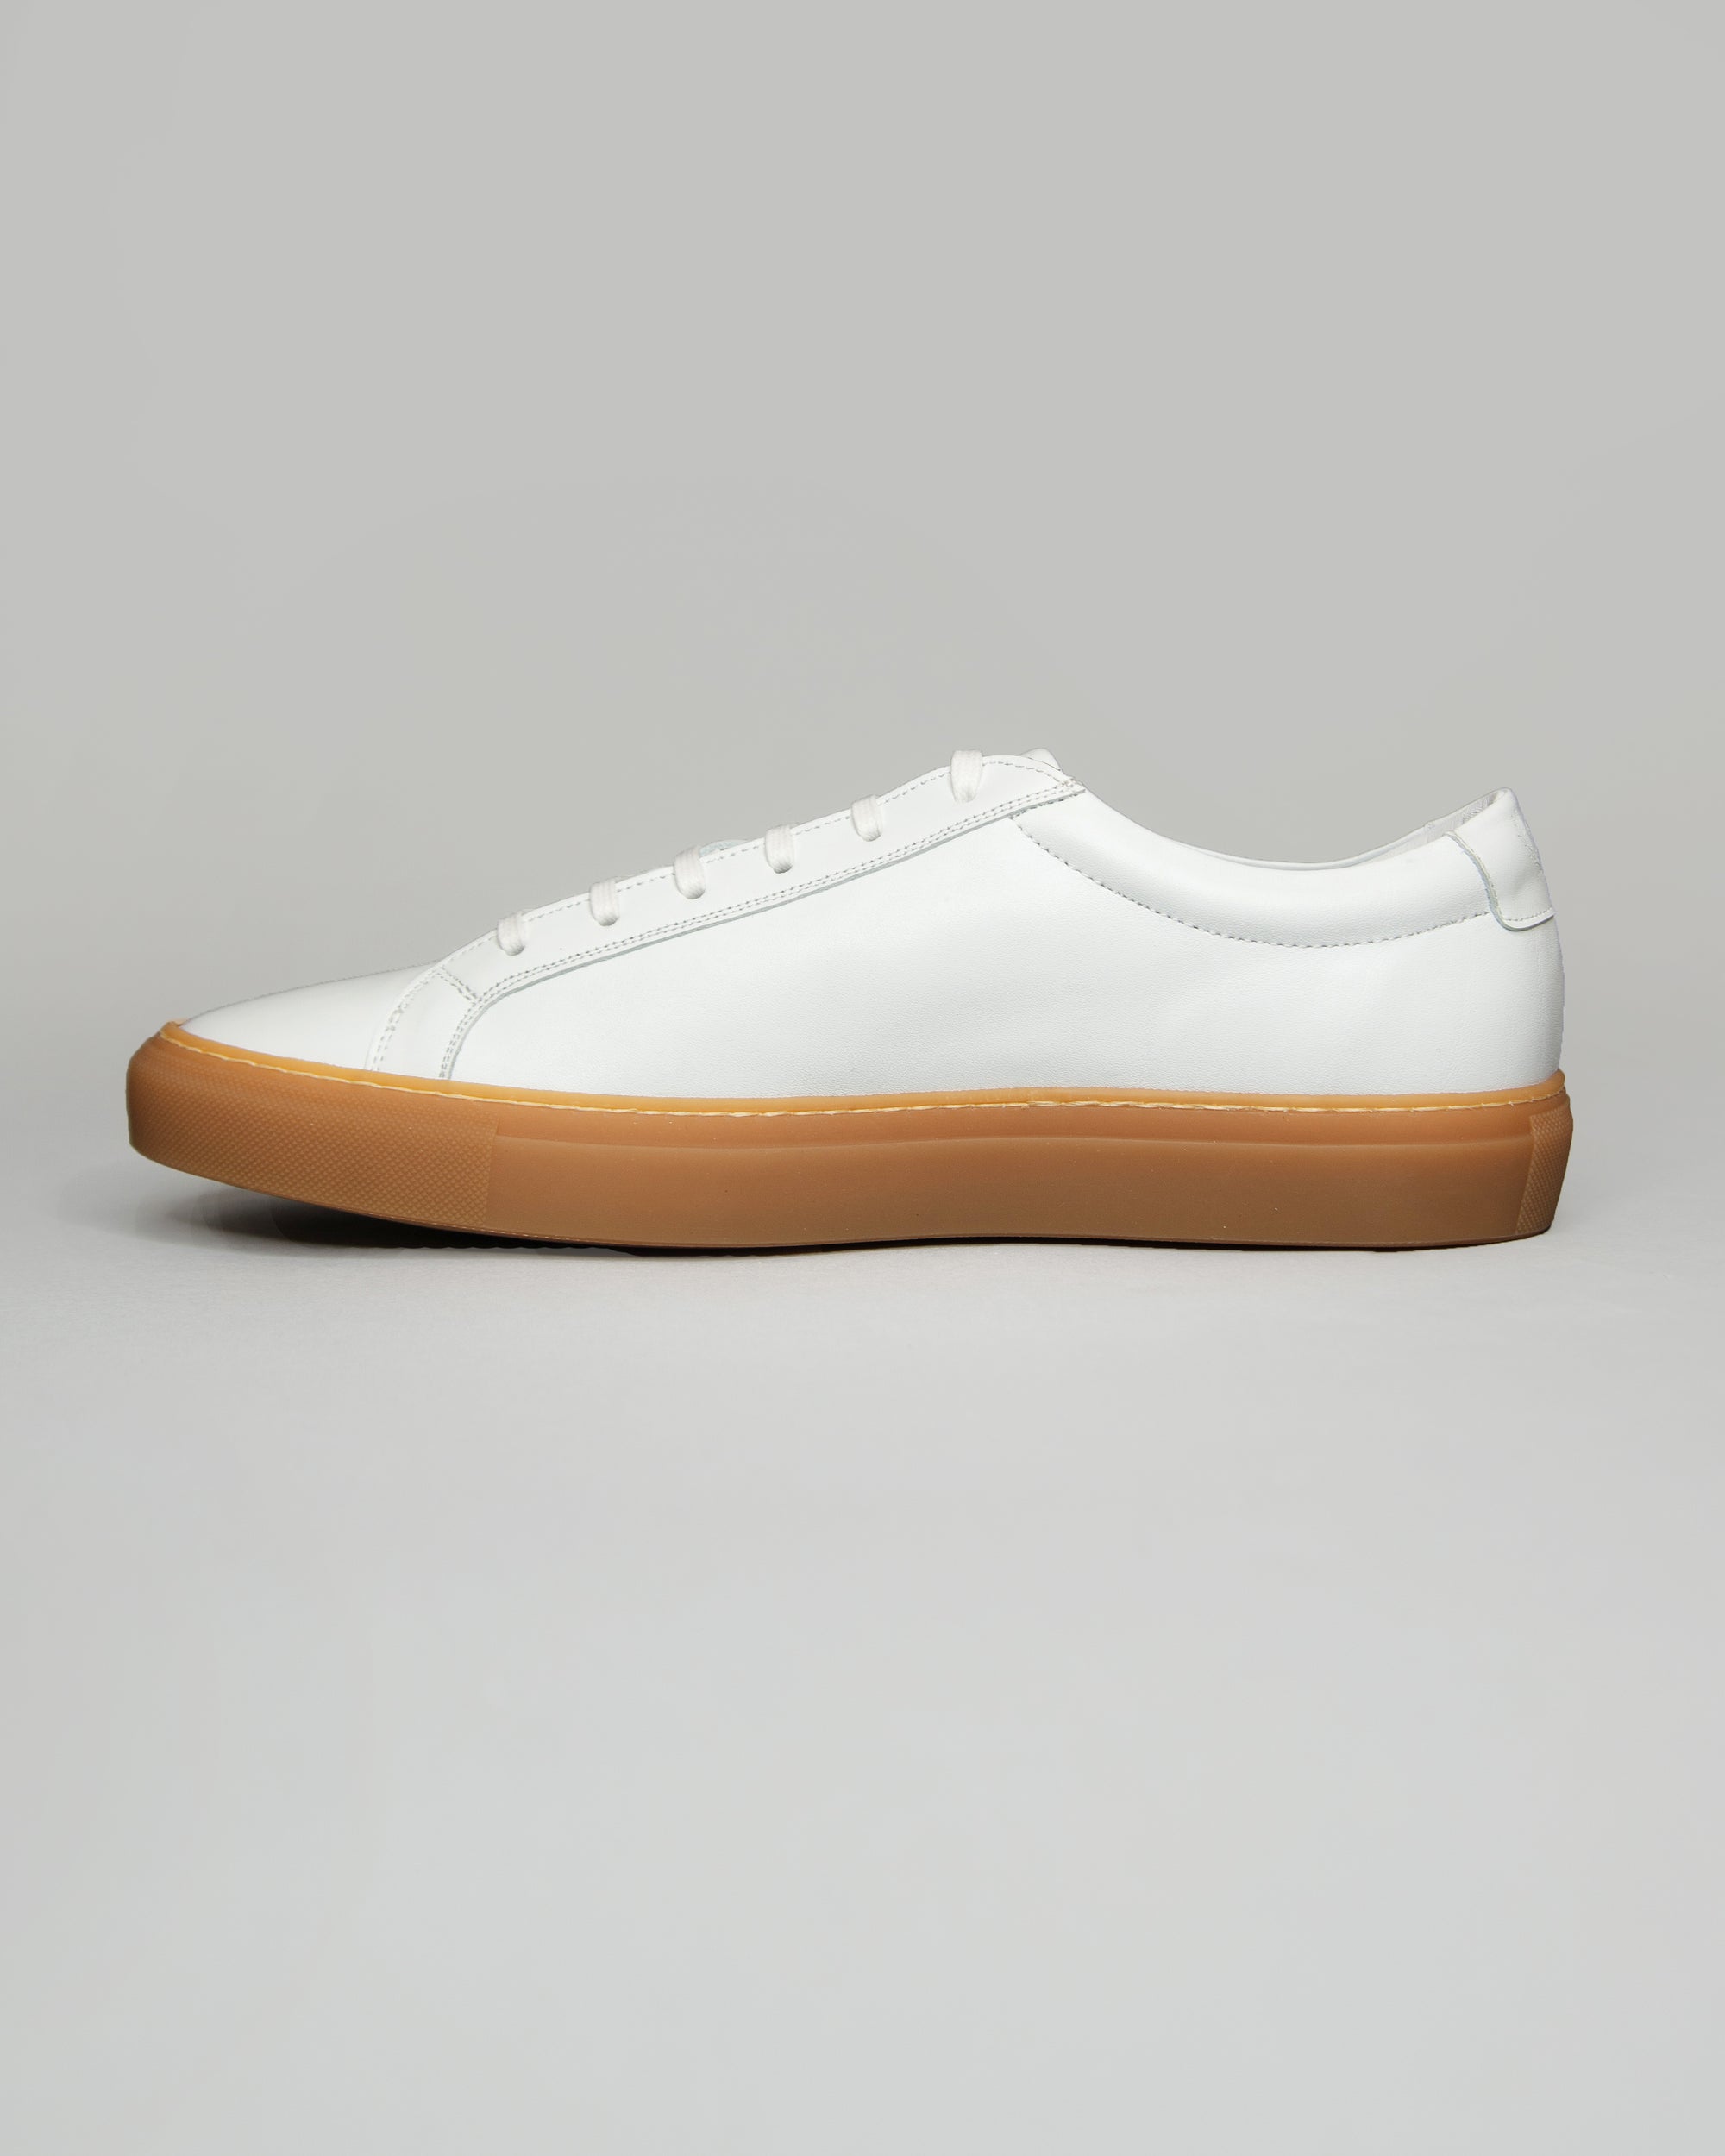 Pantofola d'Oro Top Spin Low men's sneaker in white leather